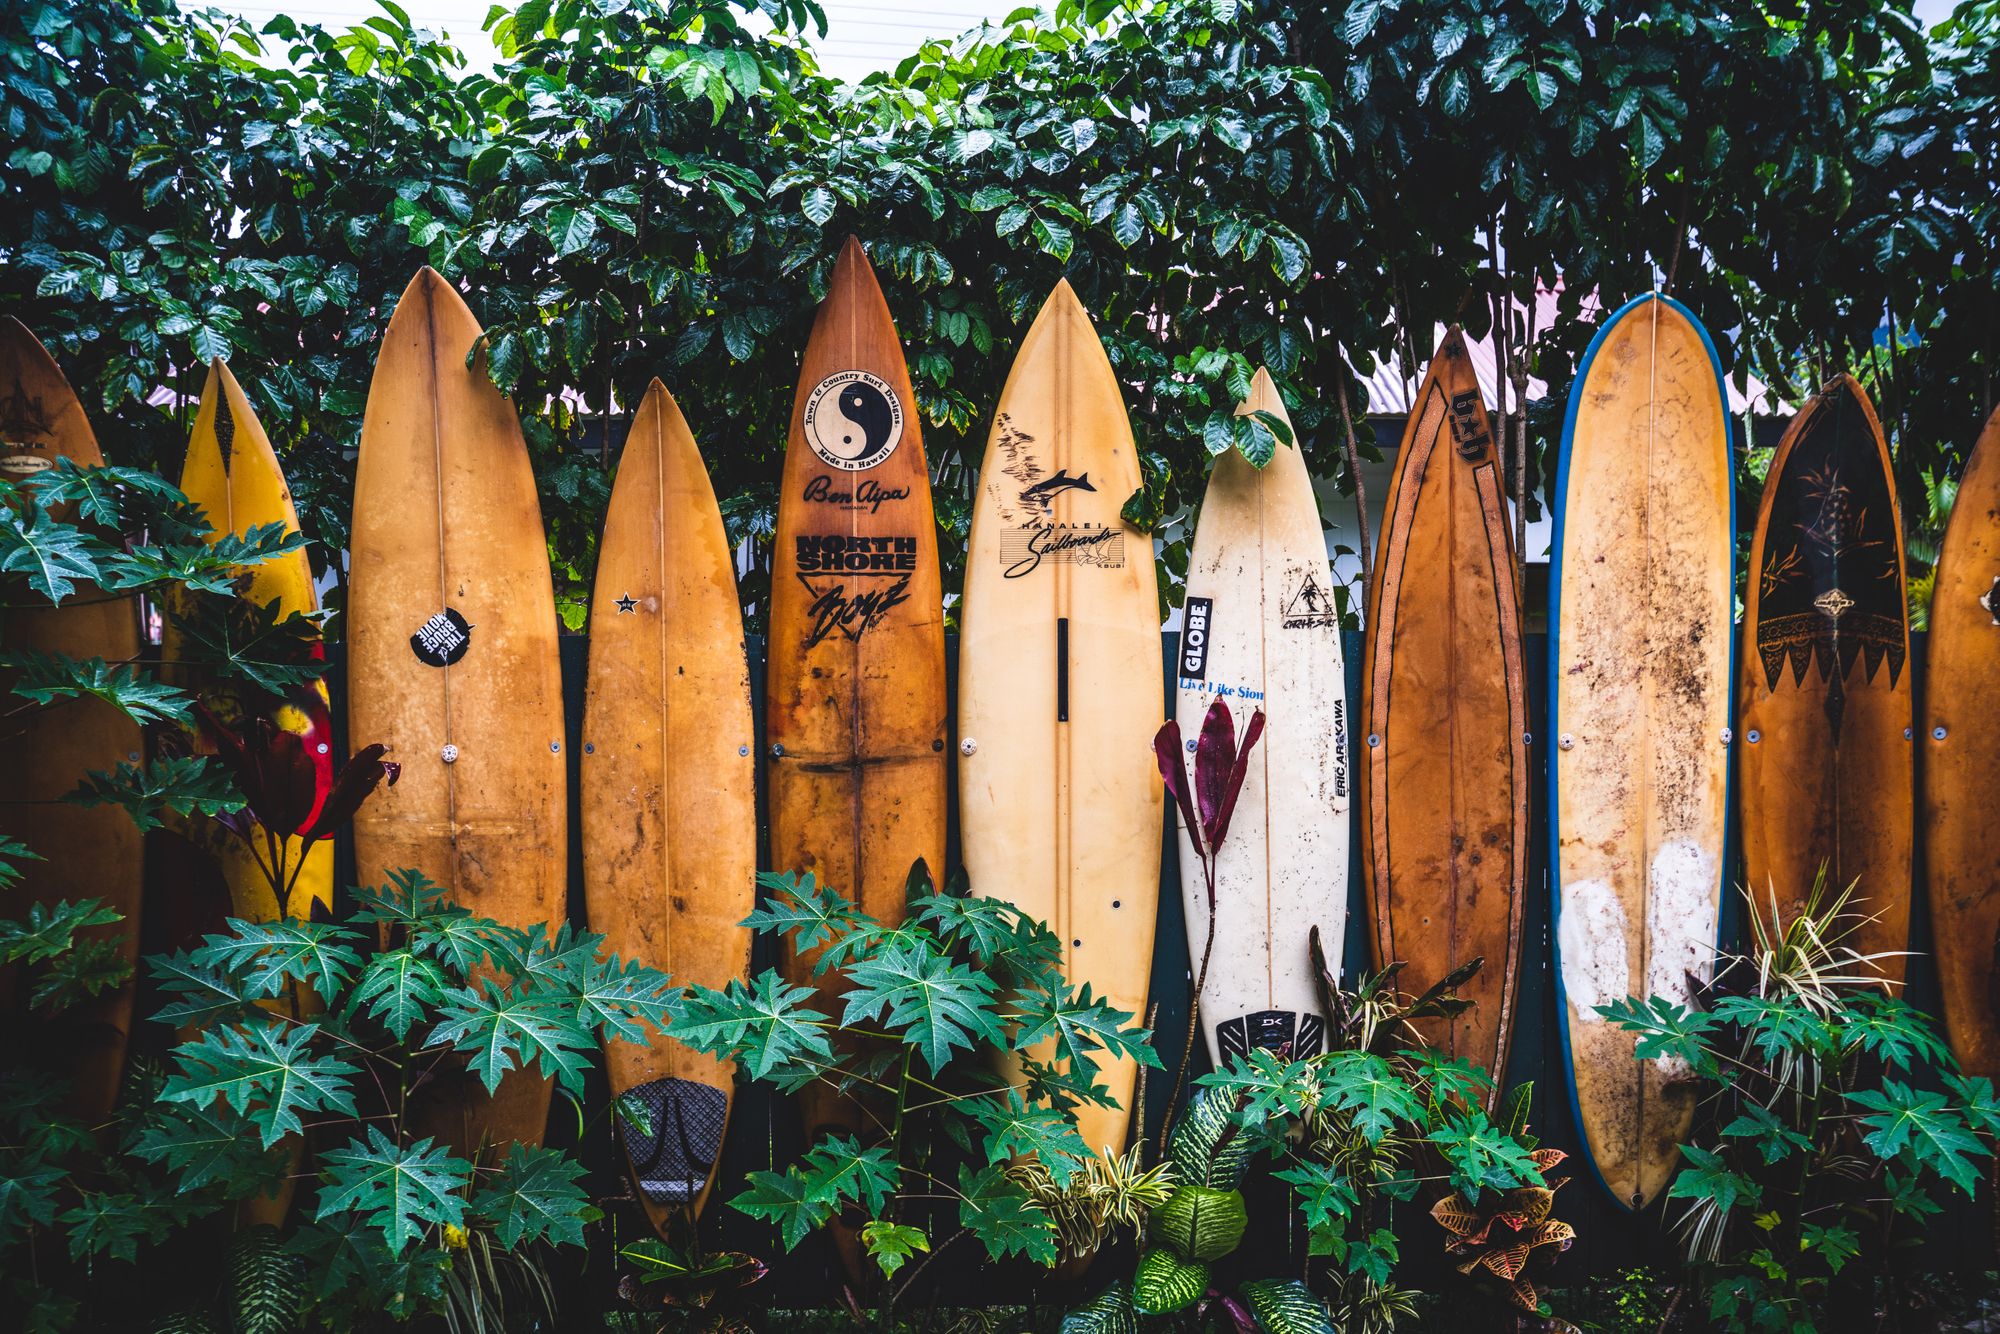 Surf boards on display